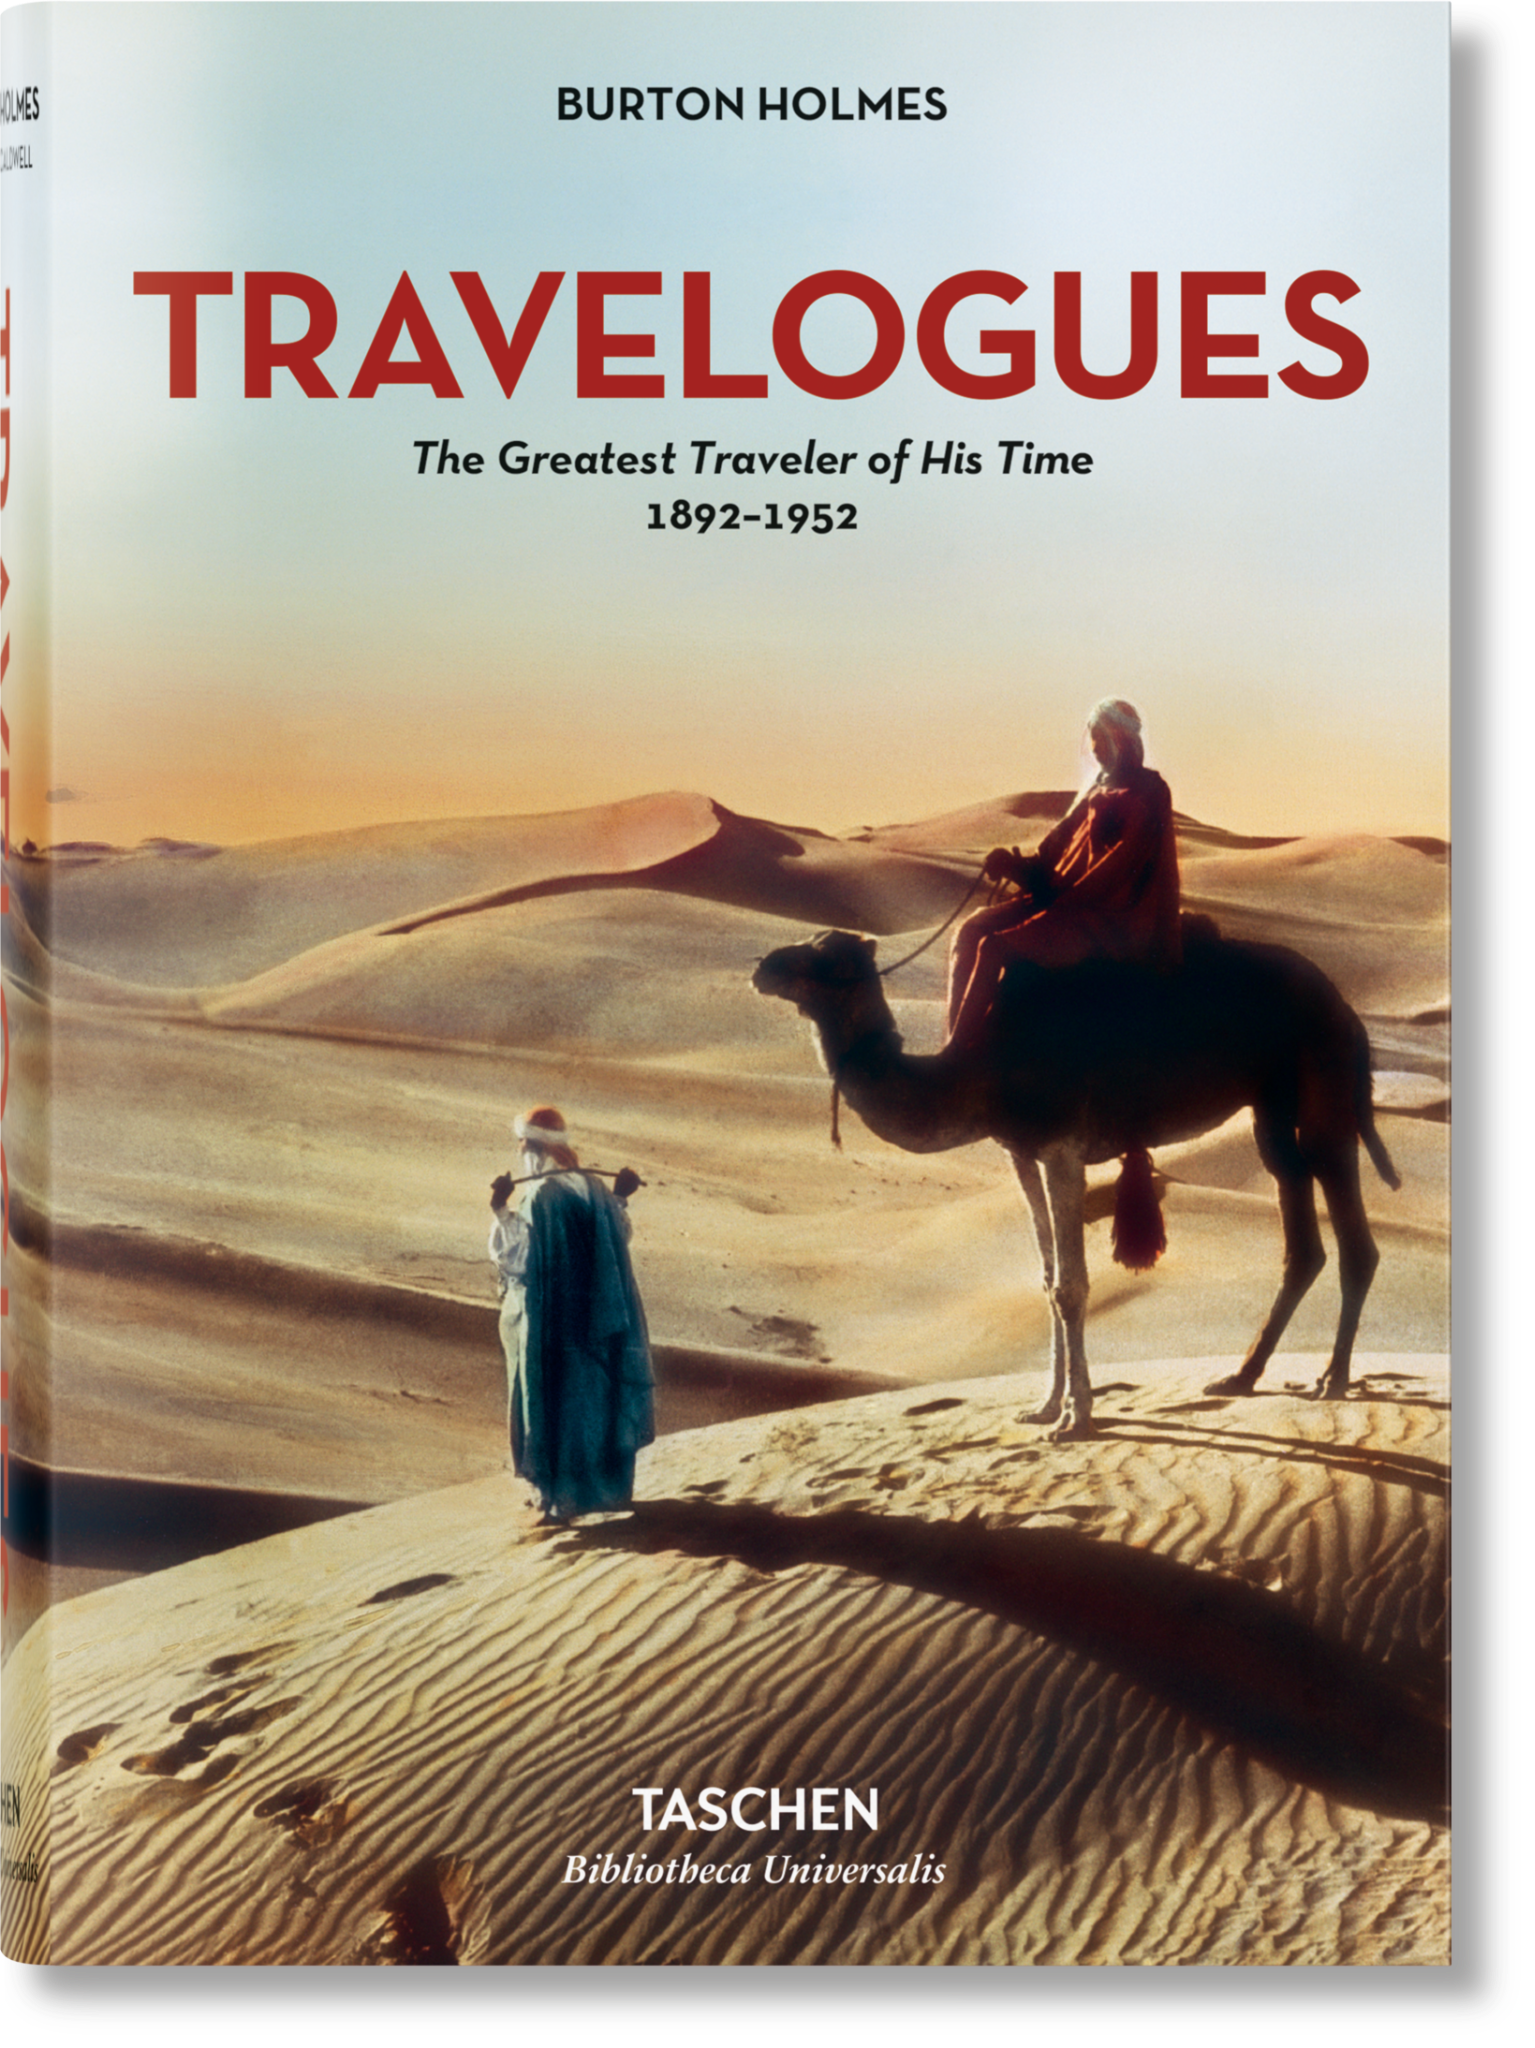  Burton Holmes. Travelogues. The Greatest Traveler of His Time 1892-1952_Genoa Caldwell_9783836557801_Taschen GmbH 